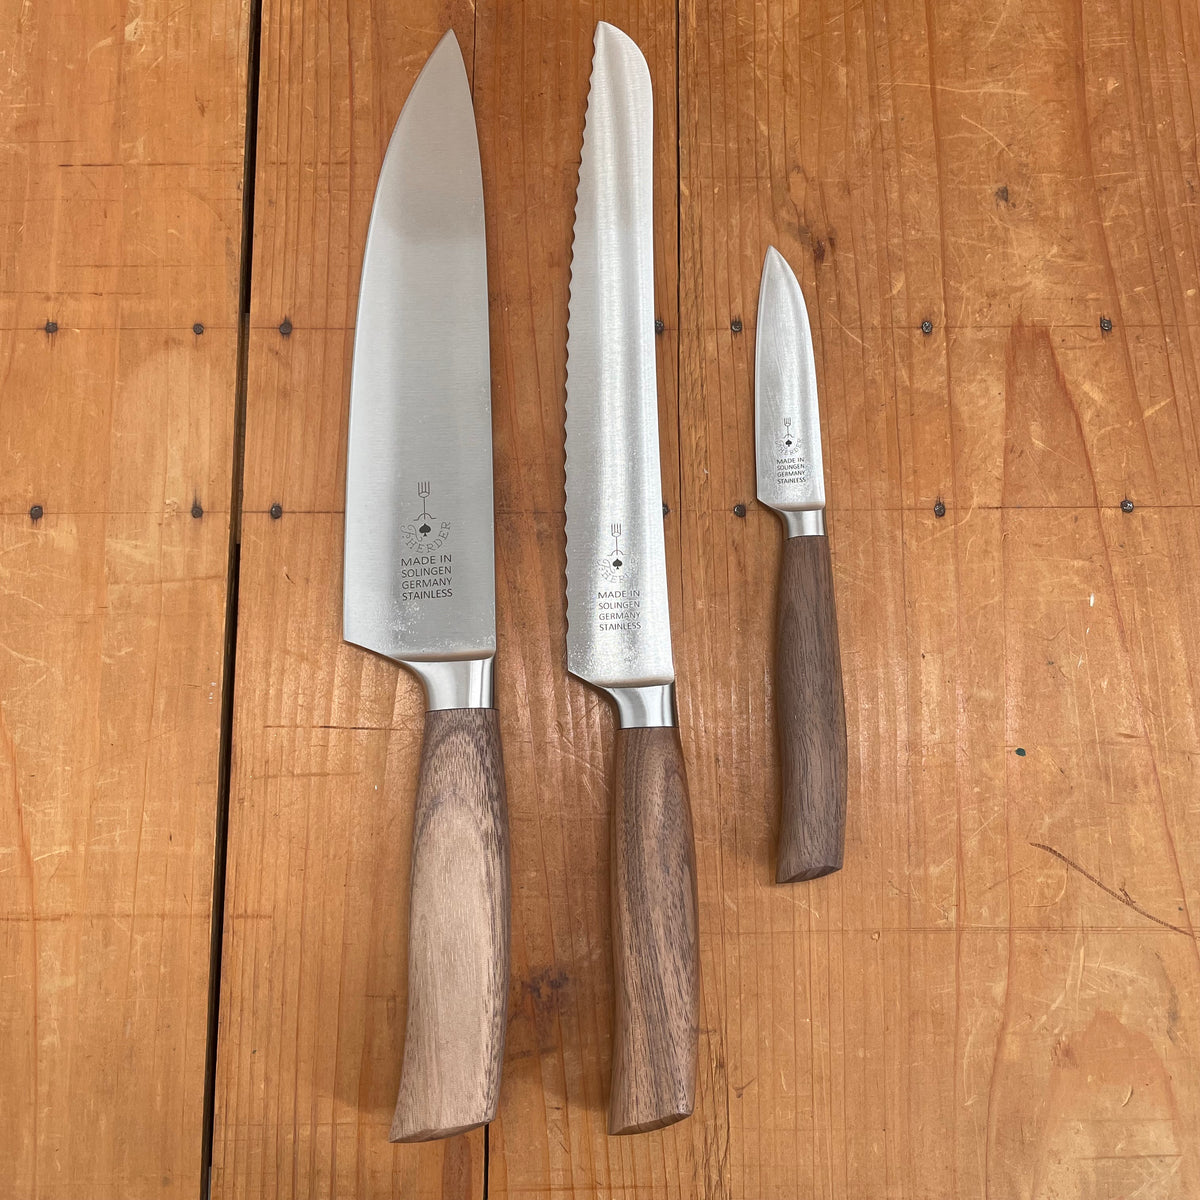 Friedr Herder Madera Forged Stainless Walnut 1/2 Bolster Knife Set - 3 Pieces